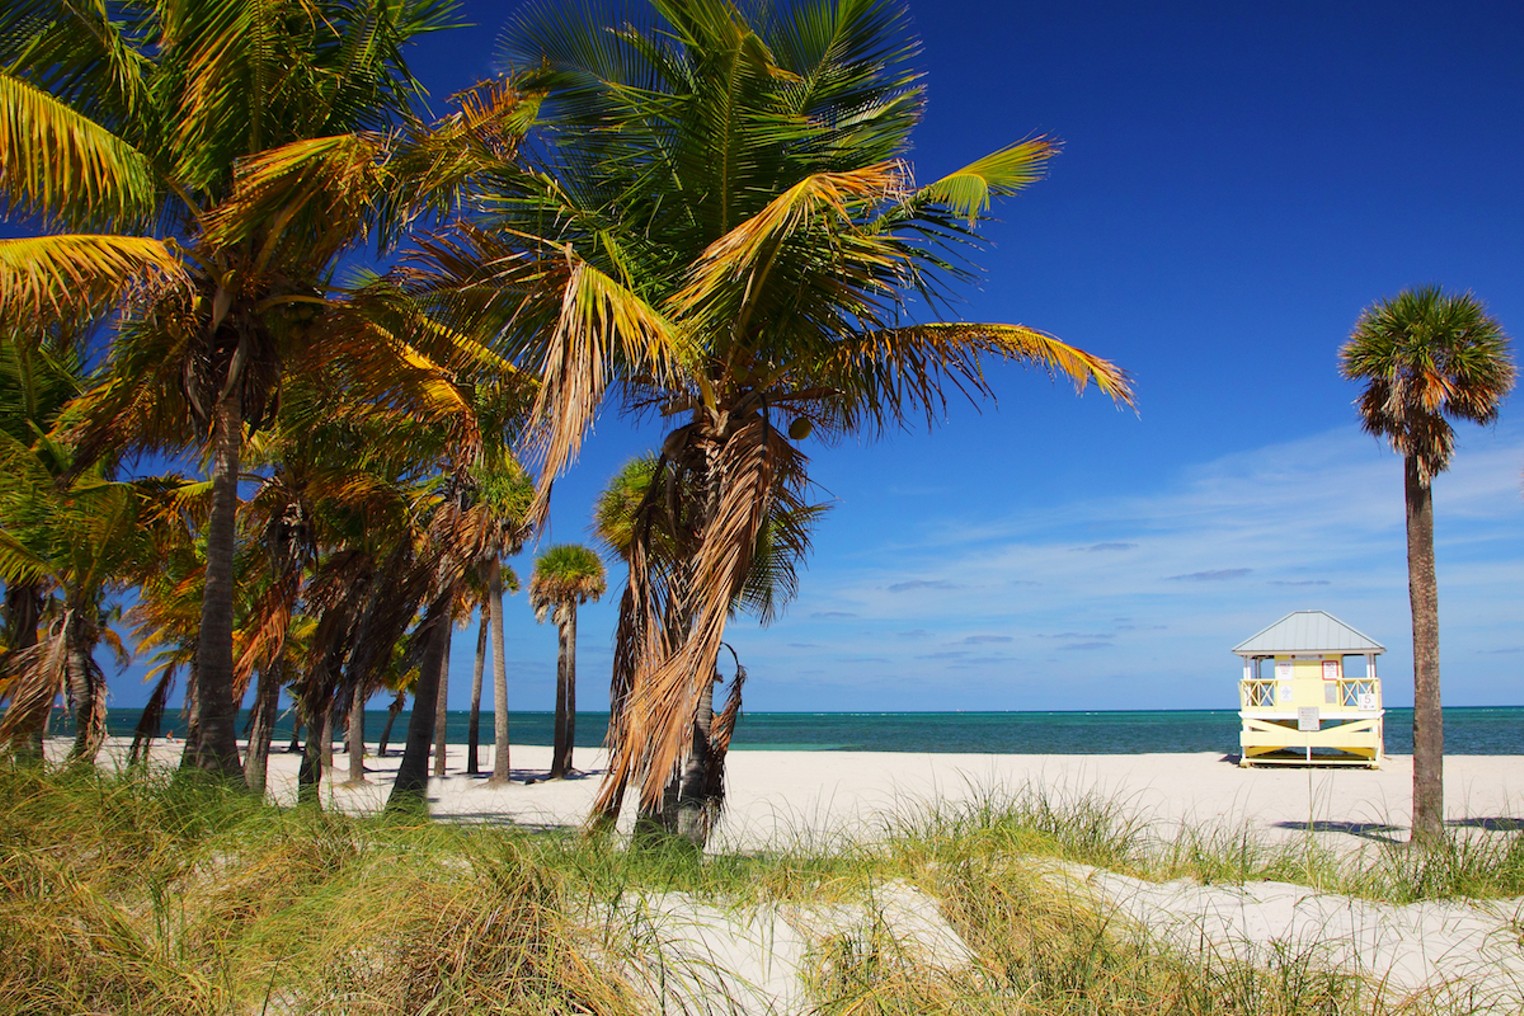 Best Beach (Miami) 2022 Crandon Park Beach Best Restaurants, Bars, Clubs, Music and Stores in Miami Miami New Times image